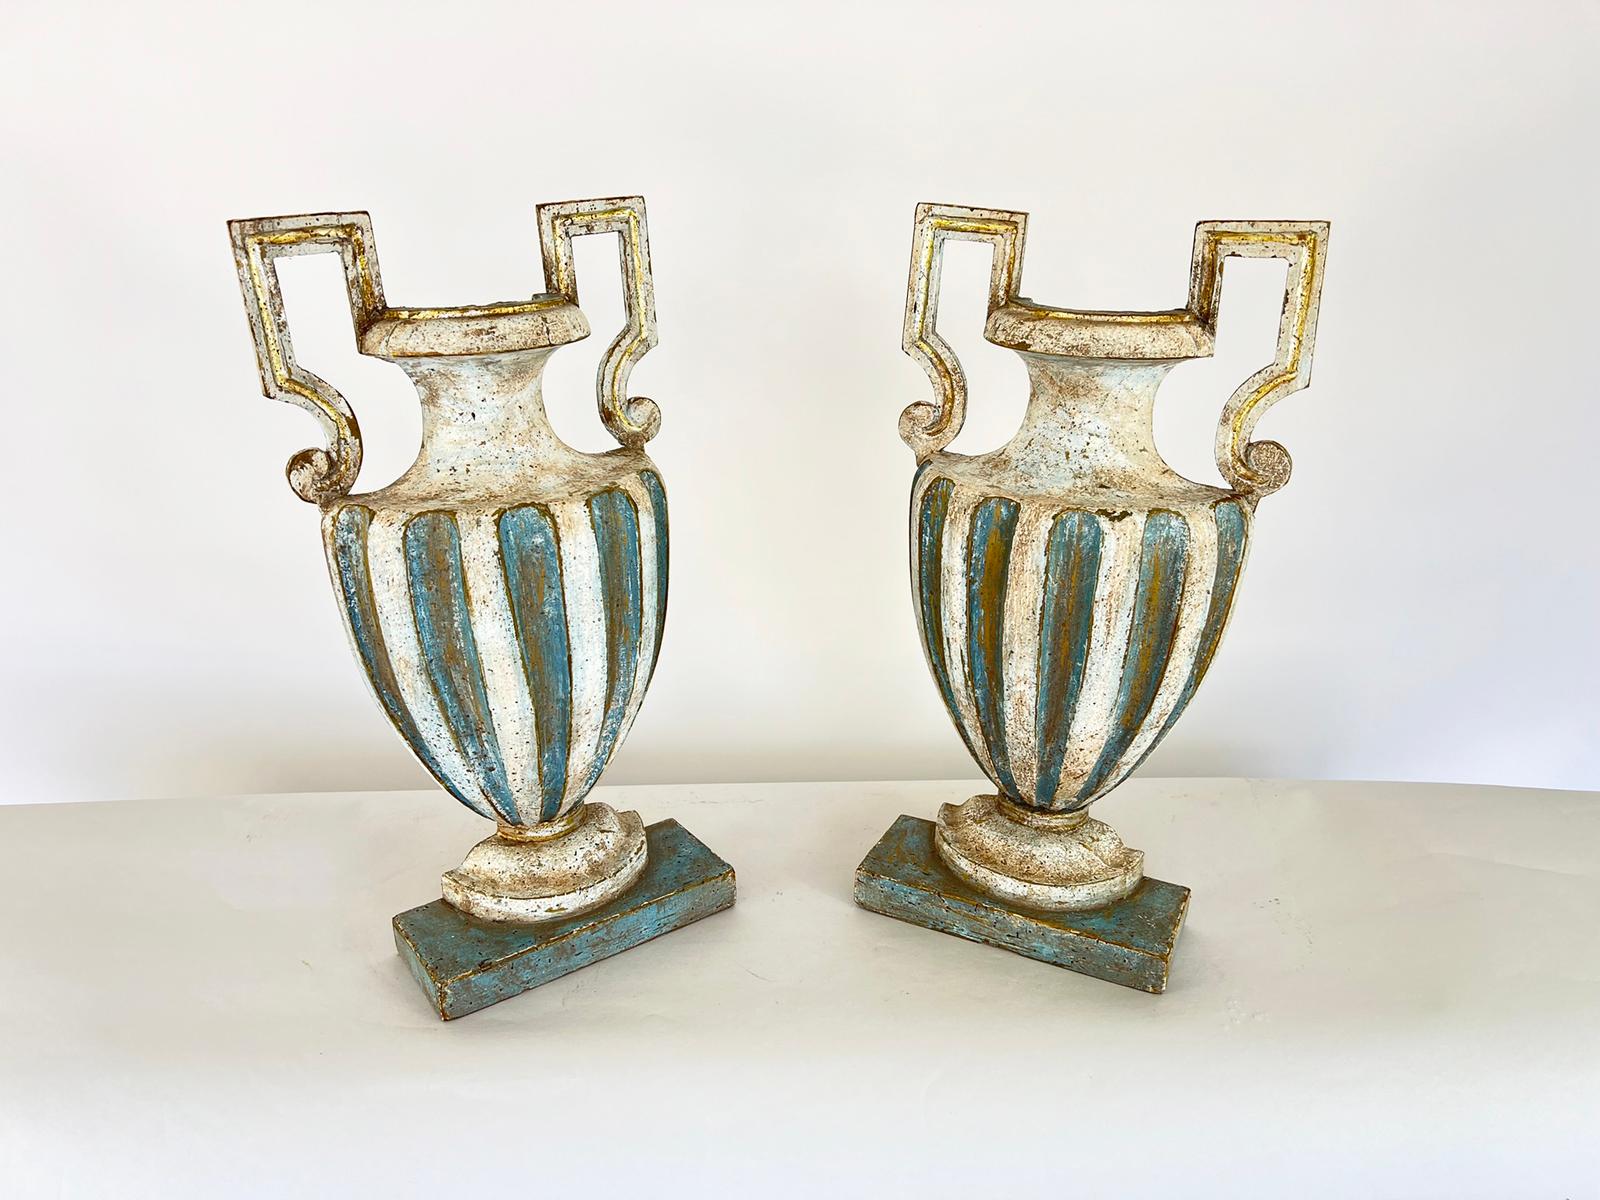 Neoclassical Pair of 18th Century Half-Urn Carved Wood Decorations For Sale